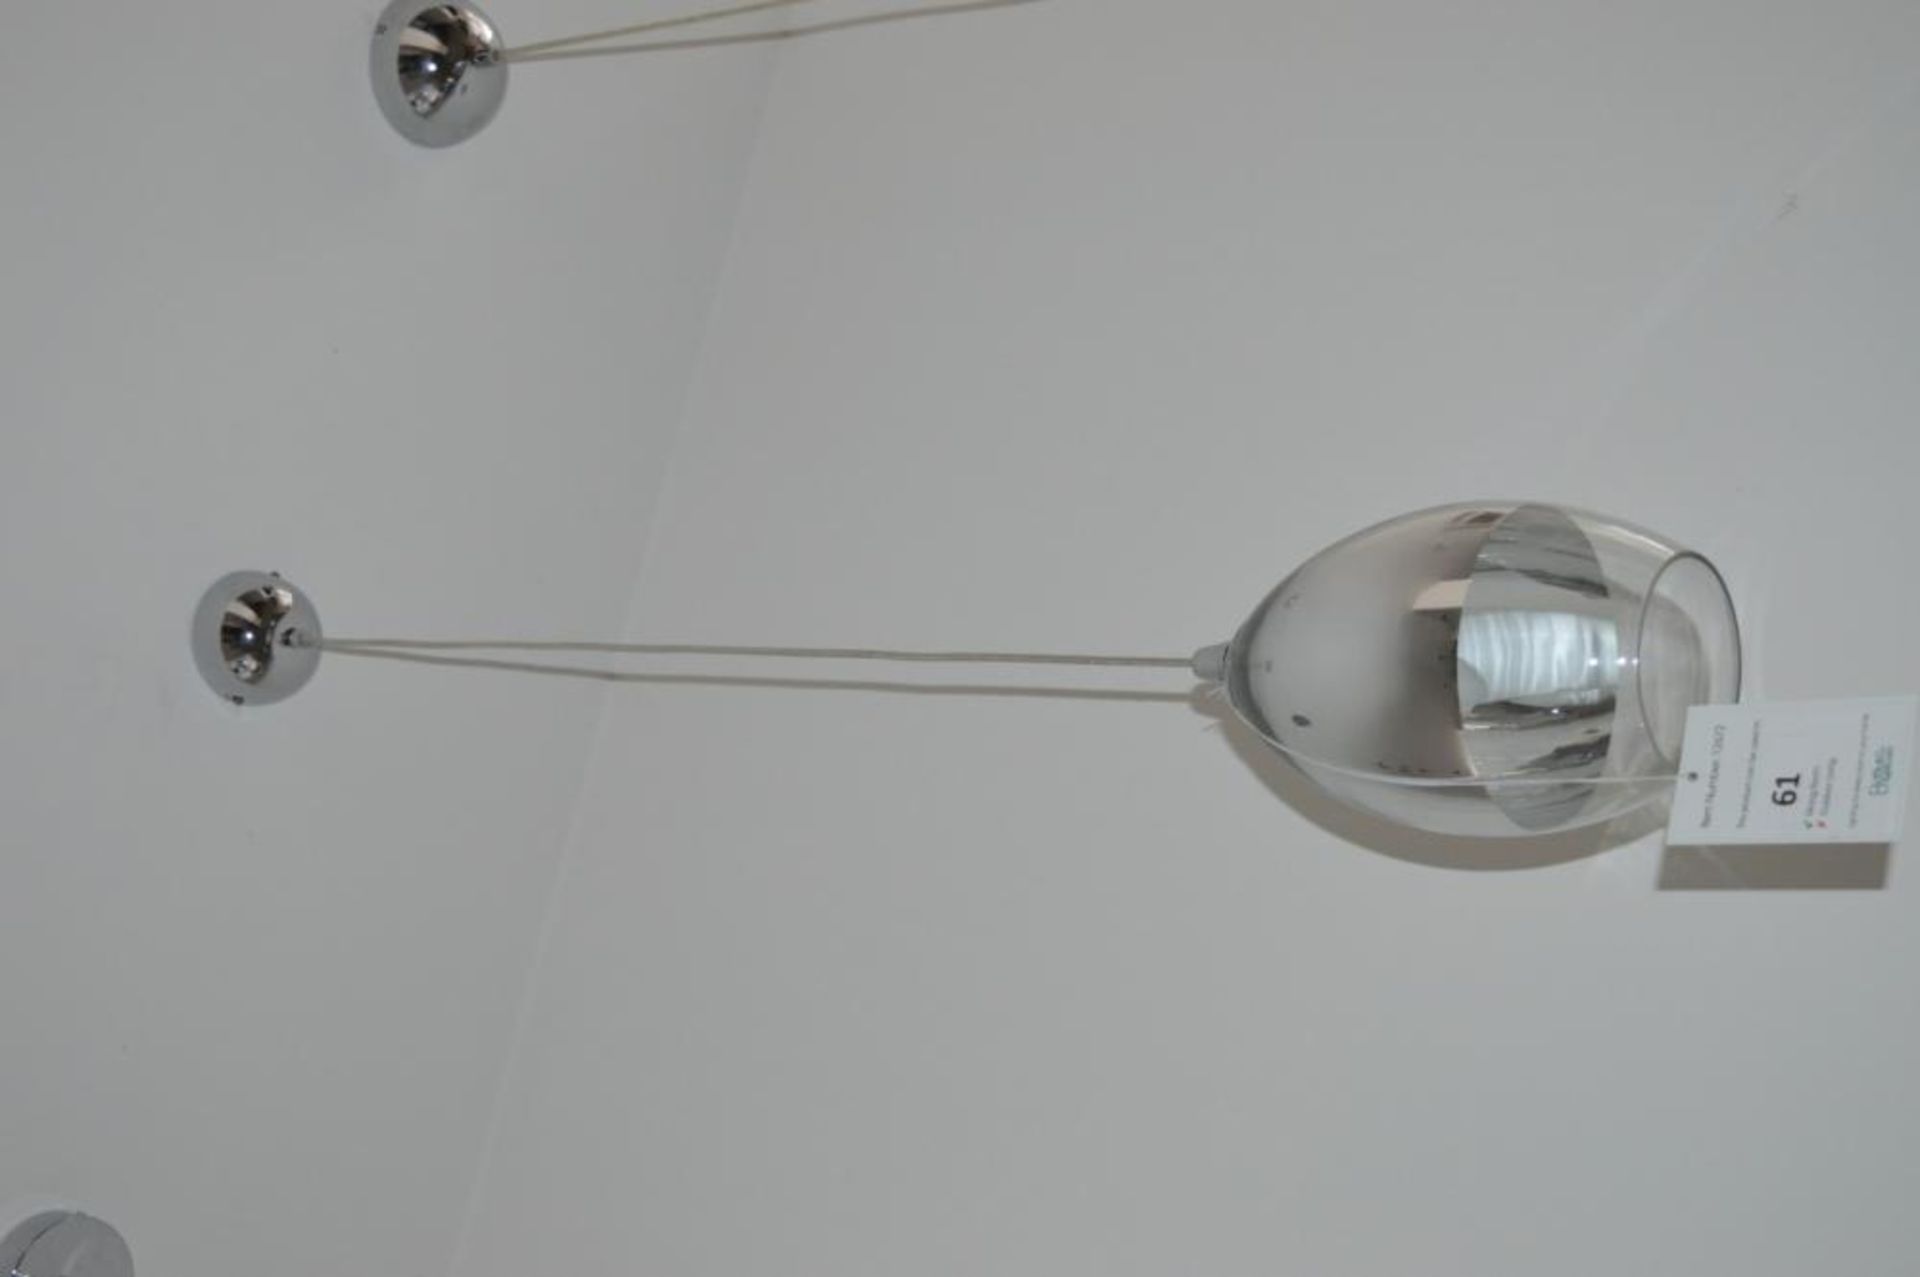 1 x Pendant Wine Bar Light Finished In Chrome Glass - Ex Display Stock - CL298 - Ref: 61 - Location: